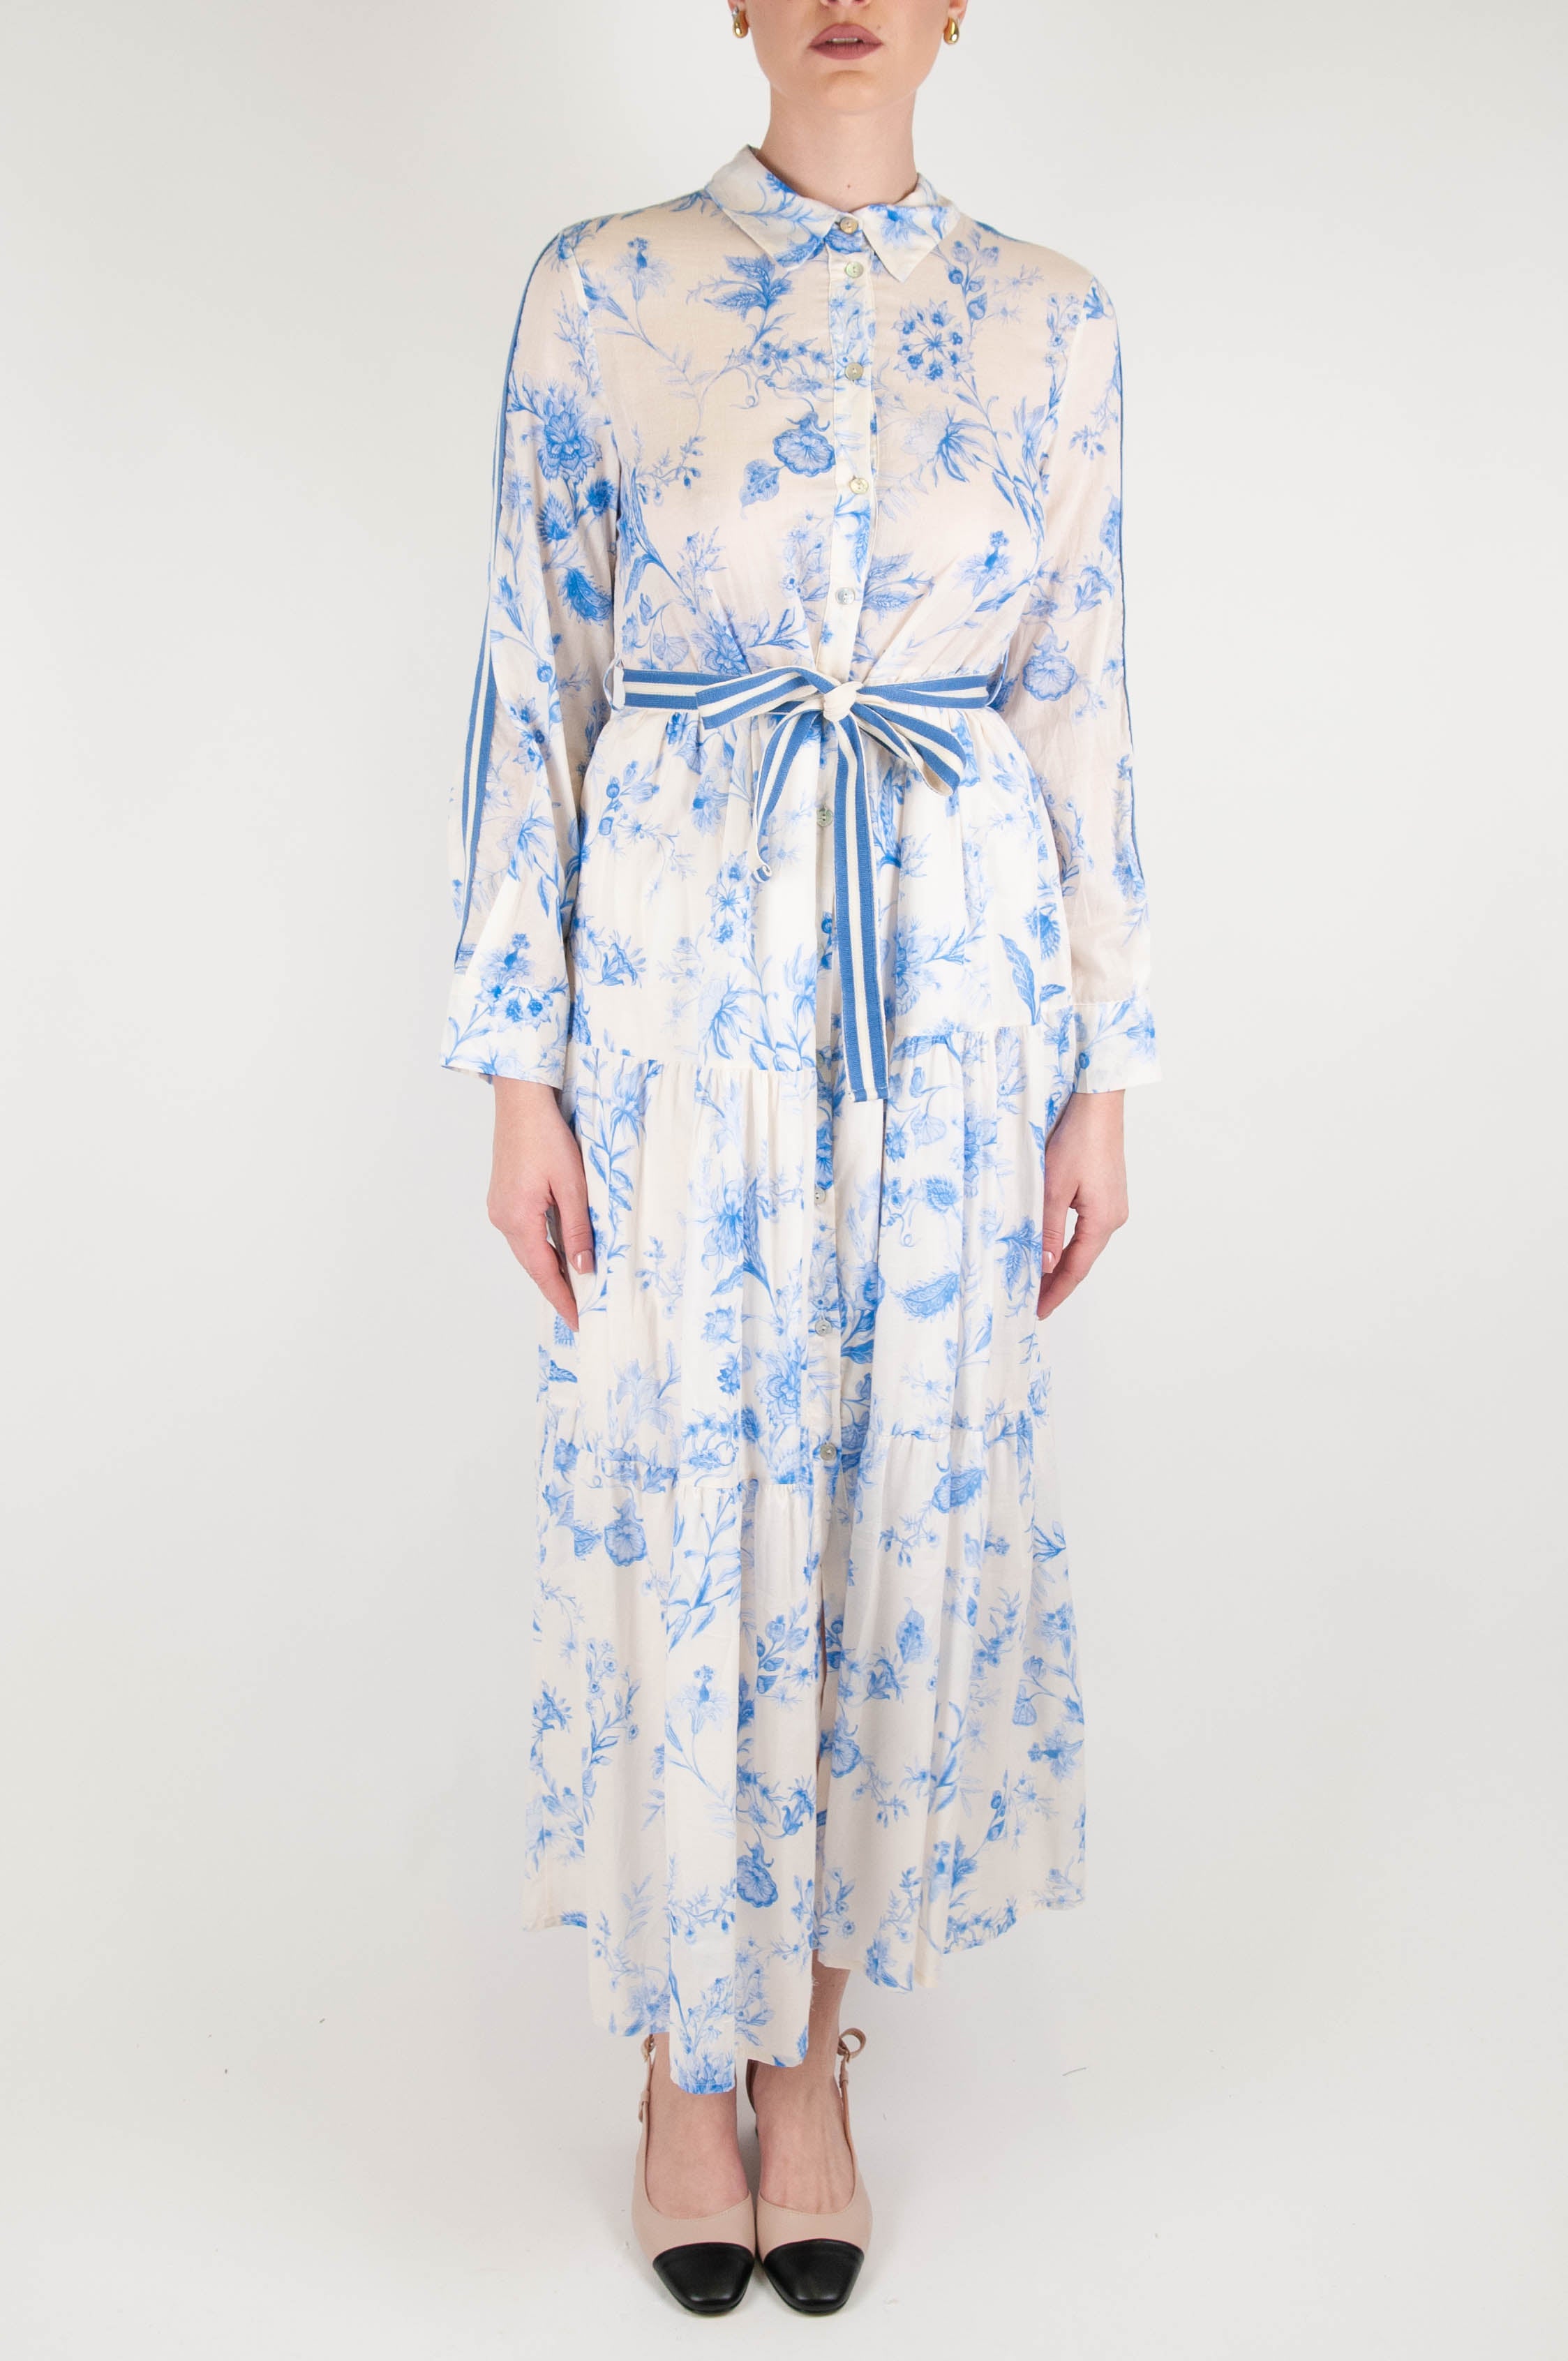 Motel - Floral patterned shirtdress in cotton muslin